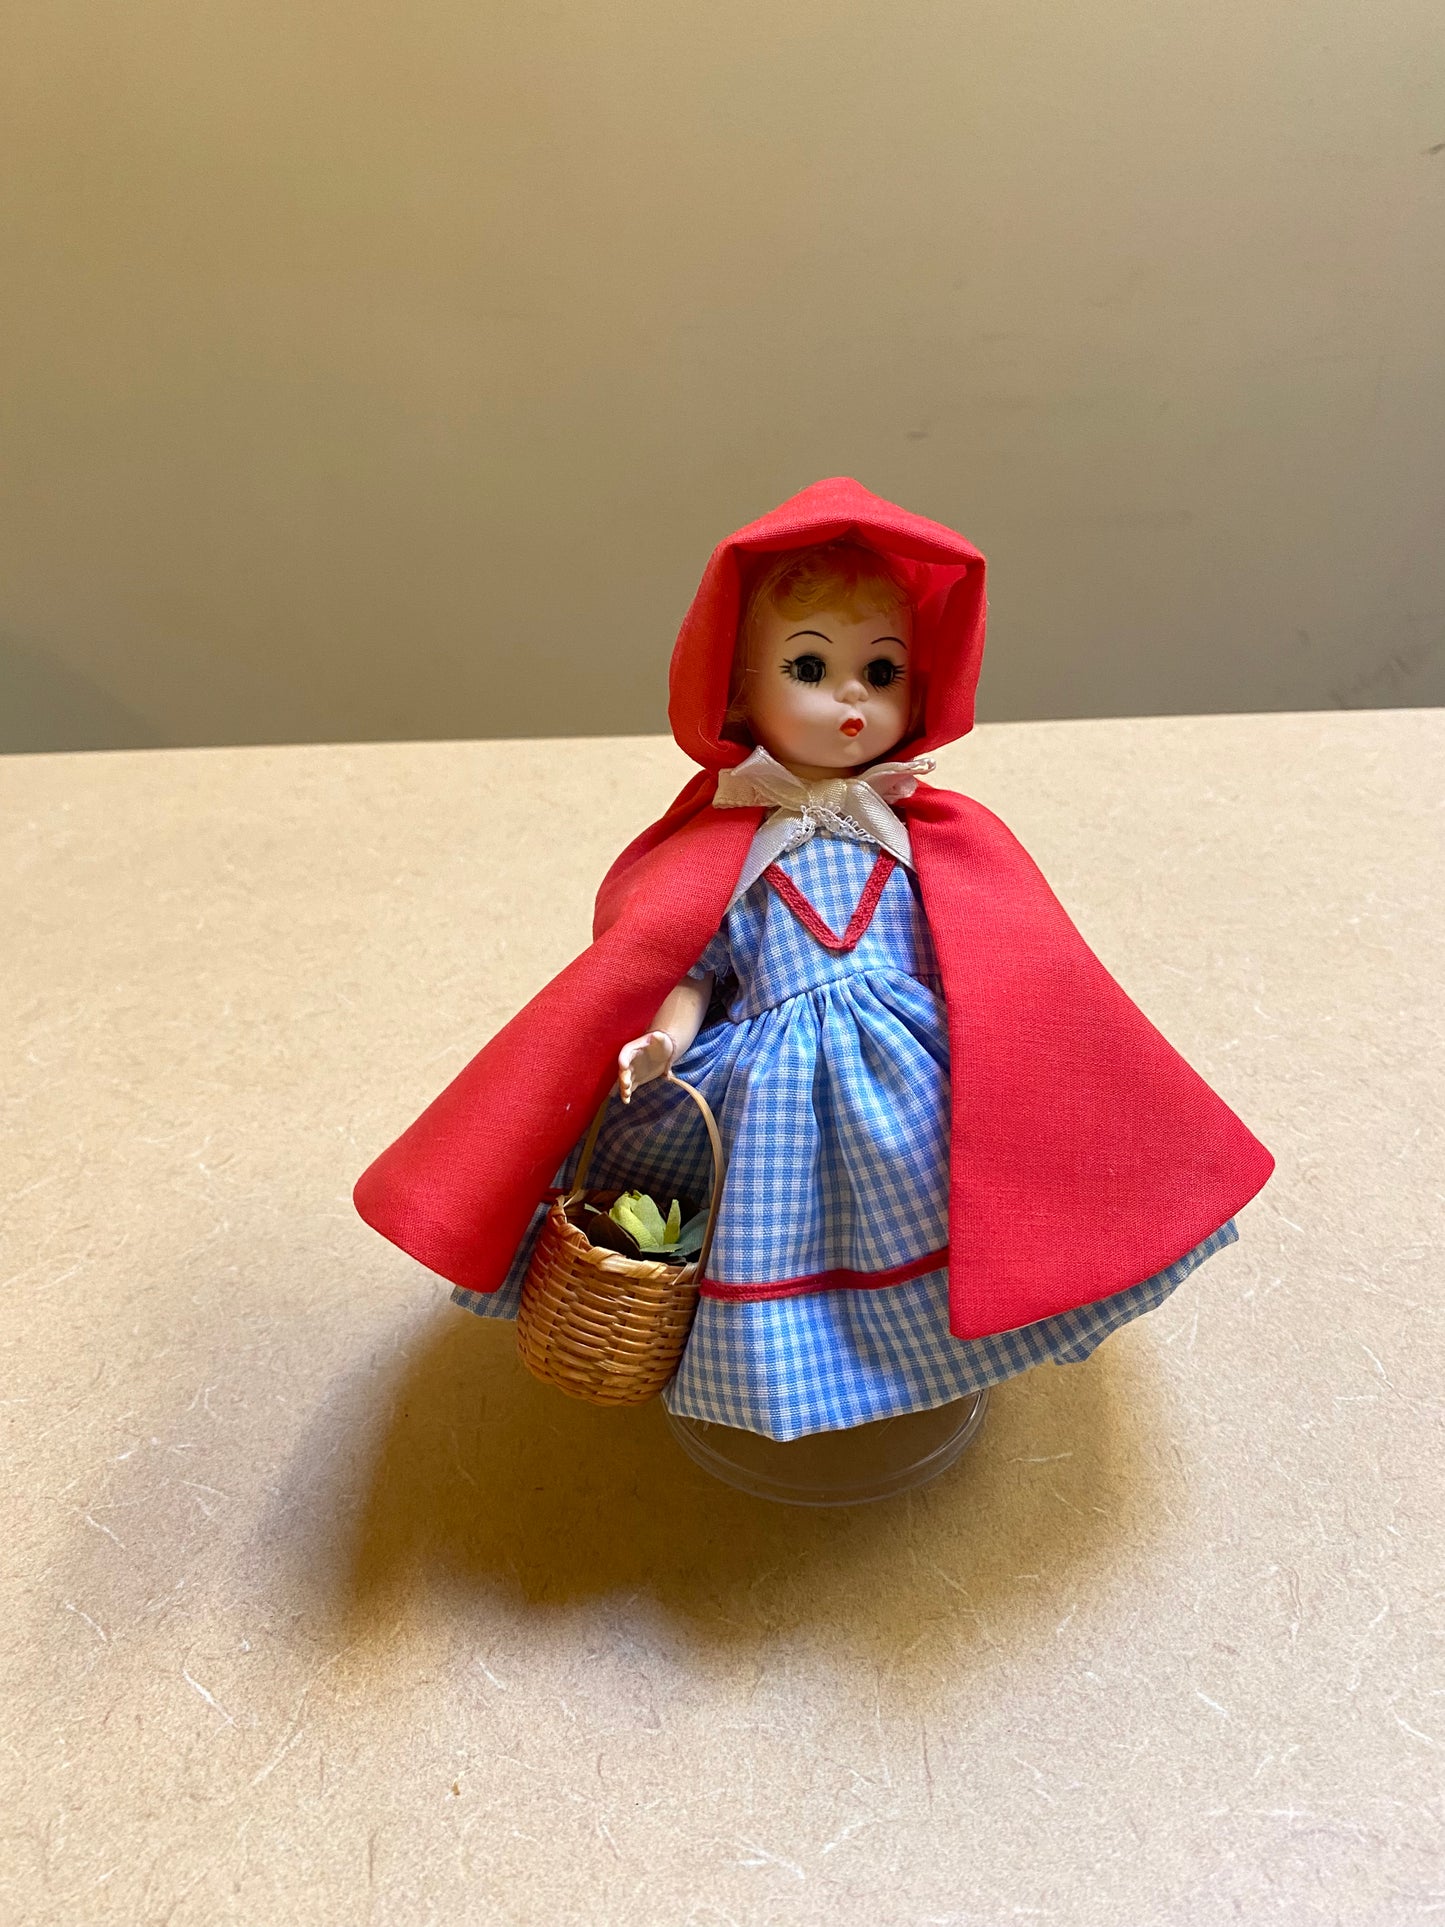 Madame Alexander's "Little Red Riding Hood" Doll